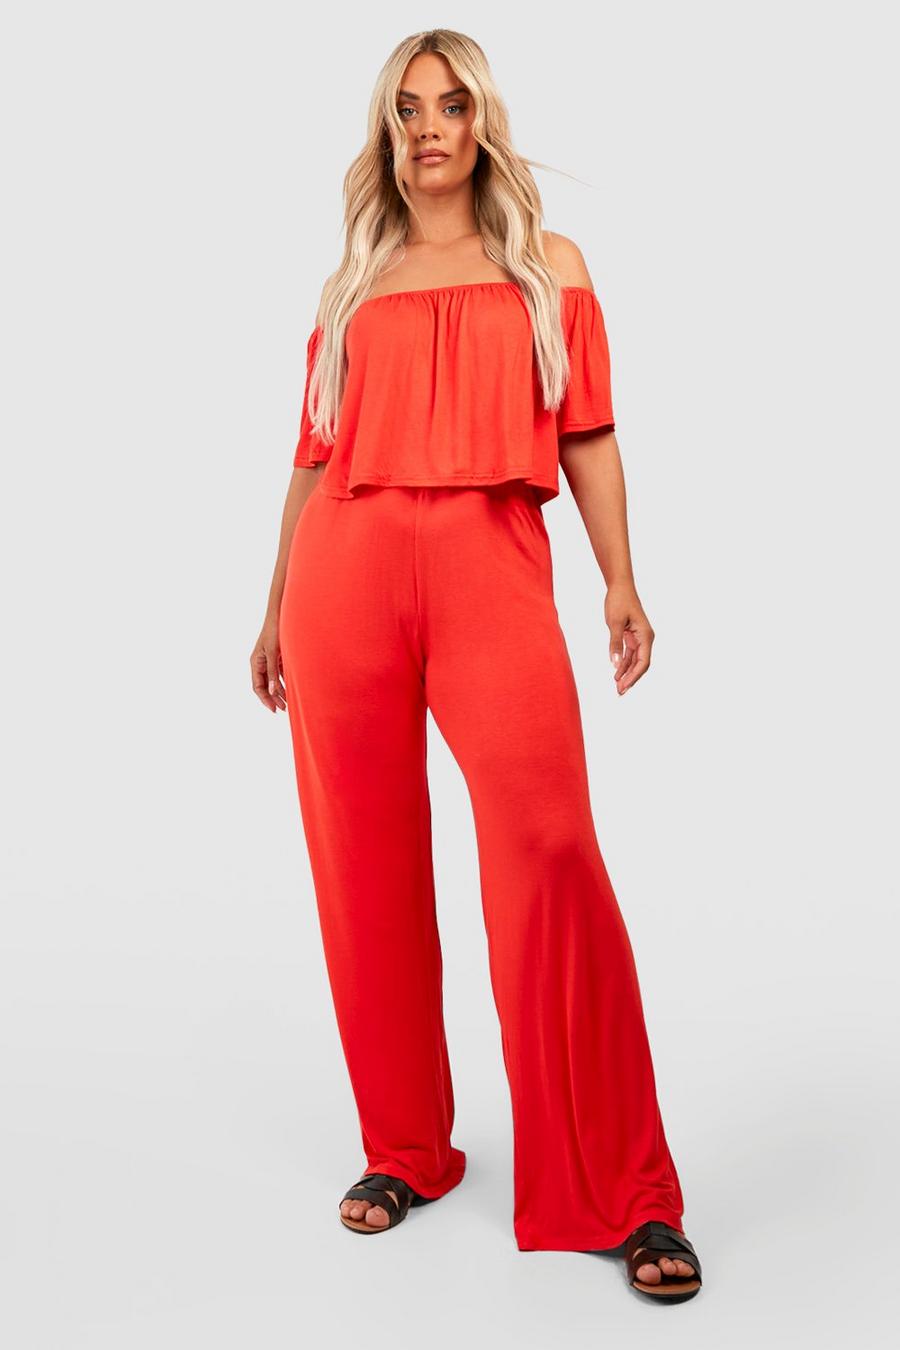 Burnt orange Plus Off The Shoulder Swing Top And Pants Two-Piece